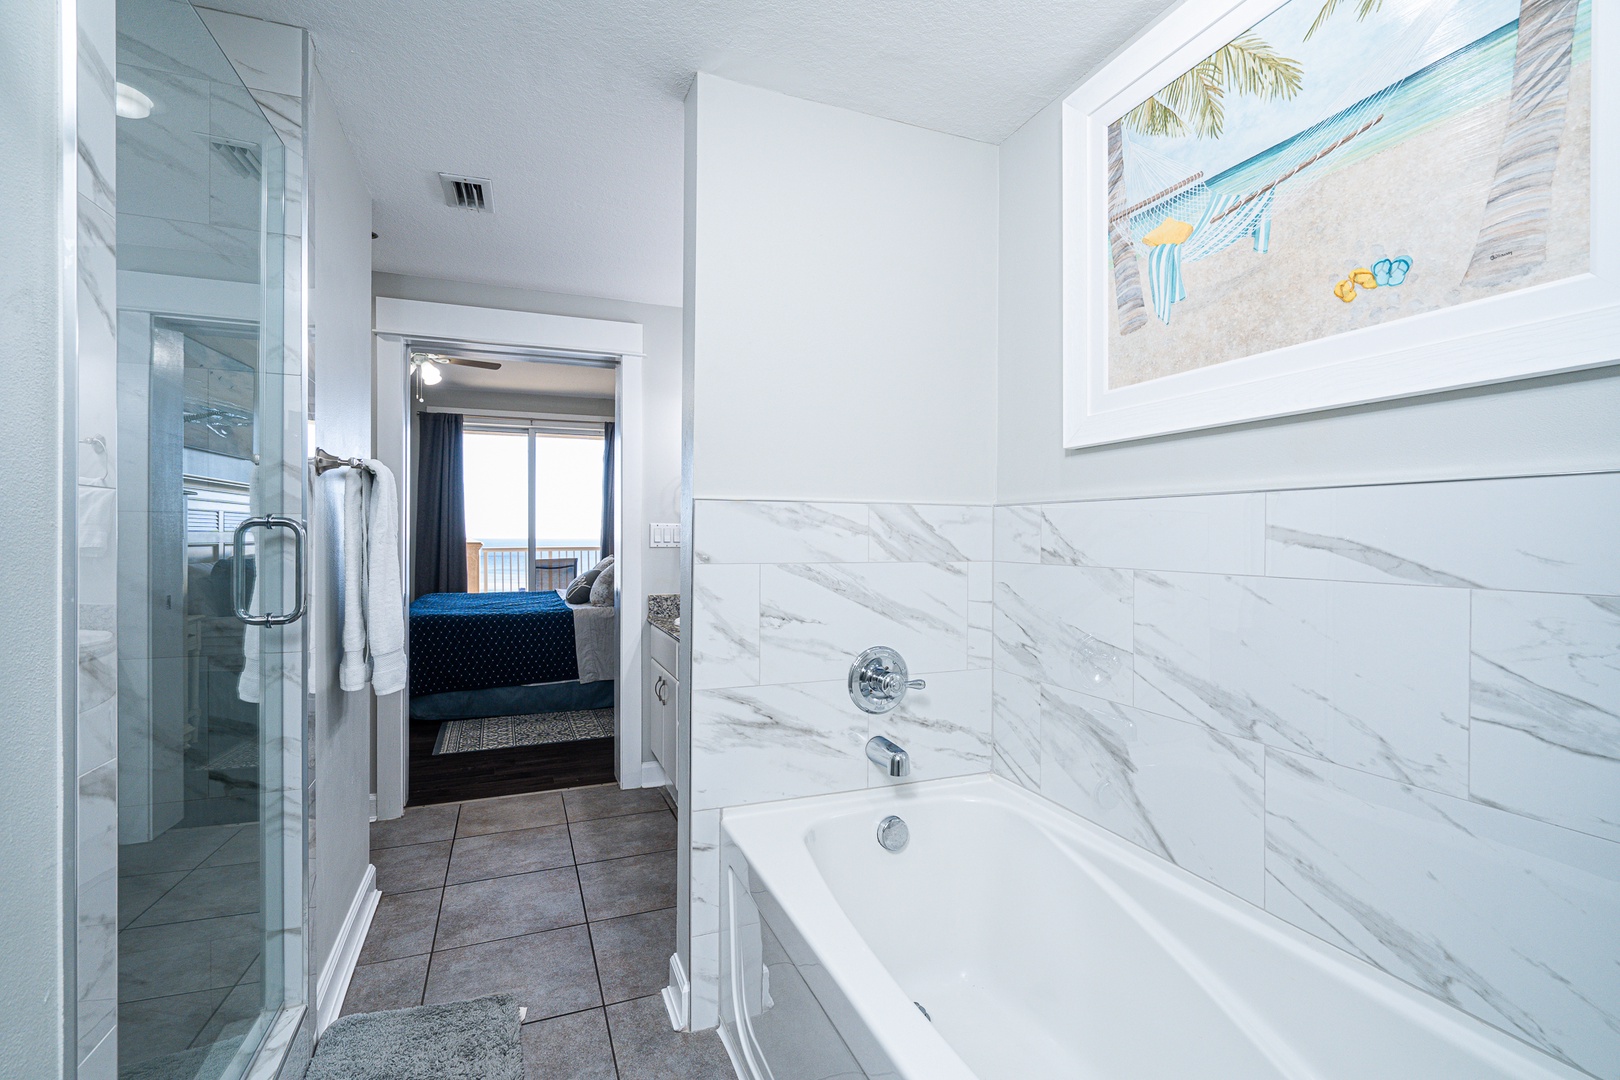 This full ensuite provides a shower, soaking tub and double vanity